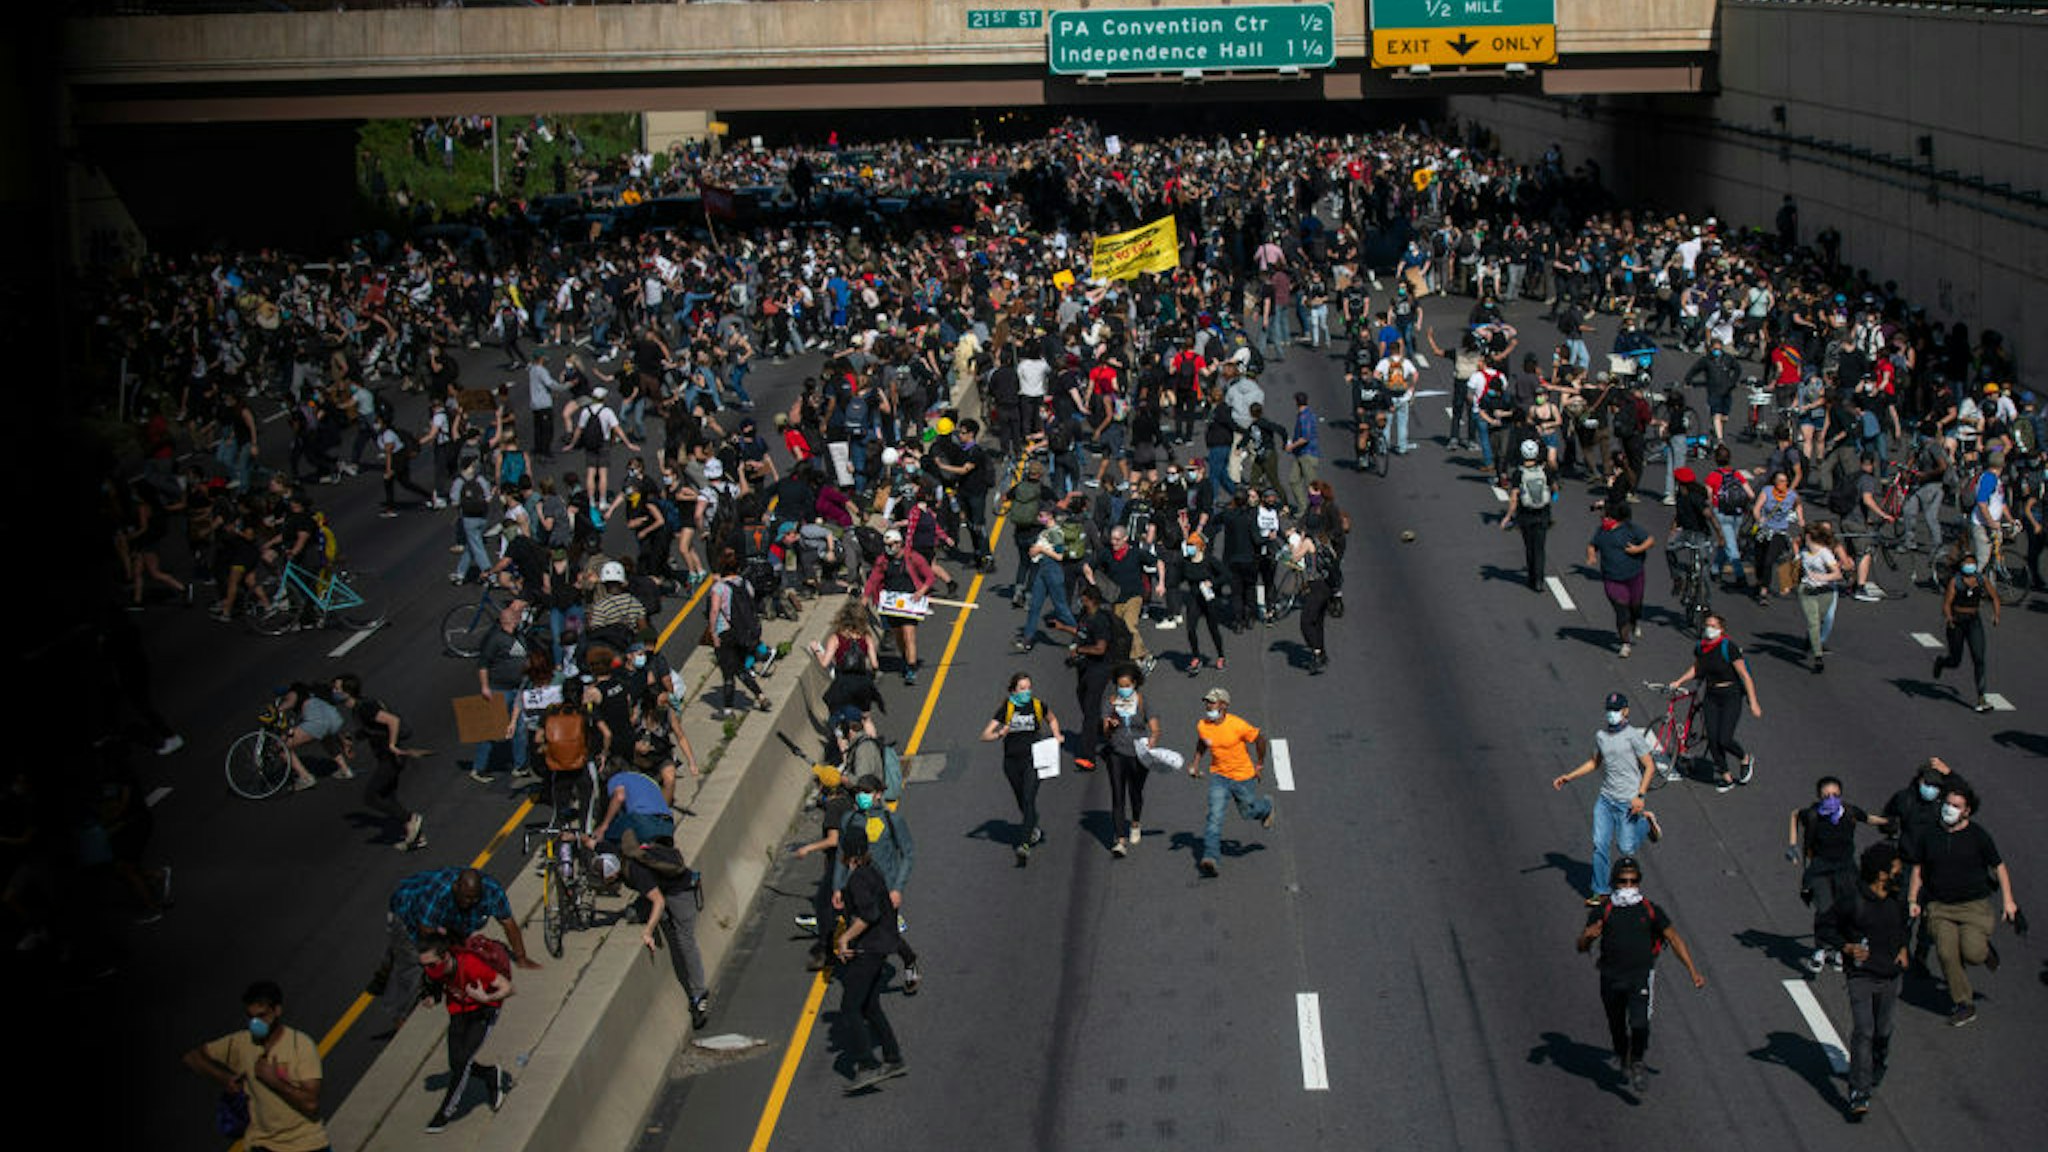 Protesters away from tear gas after a march through Center City on June 1, 2020 in Philadelphia, Pennsylvania. Demonstrations have erupted all across the country in response to George Floyd's death in Minneapolis, Minnesota while in police custody a week ago.